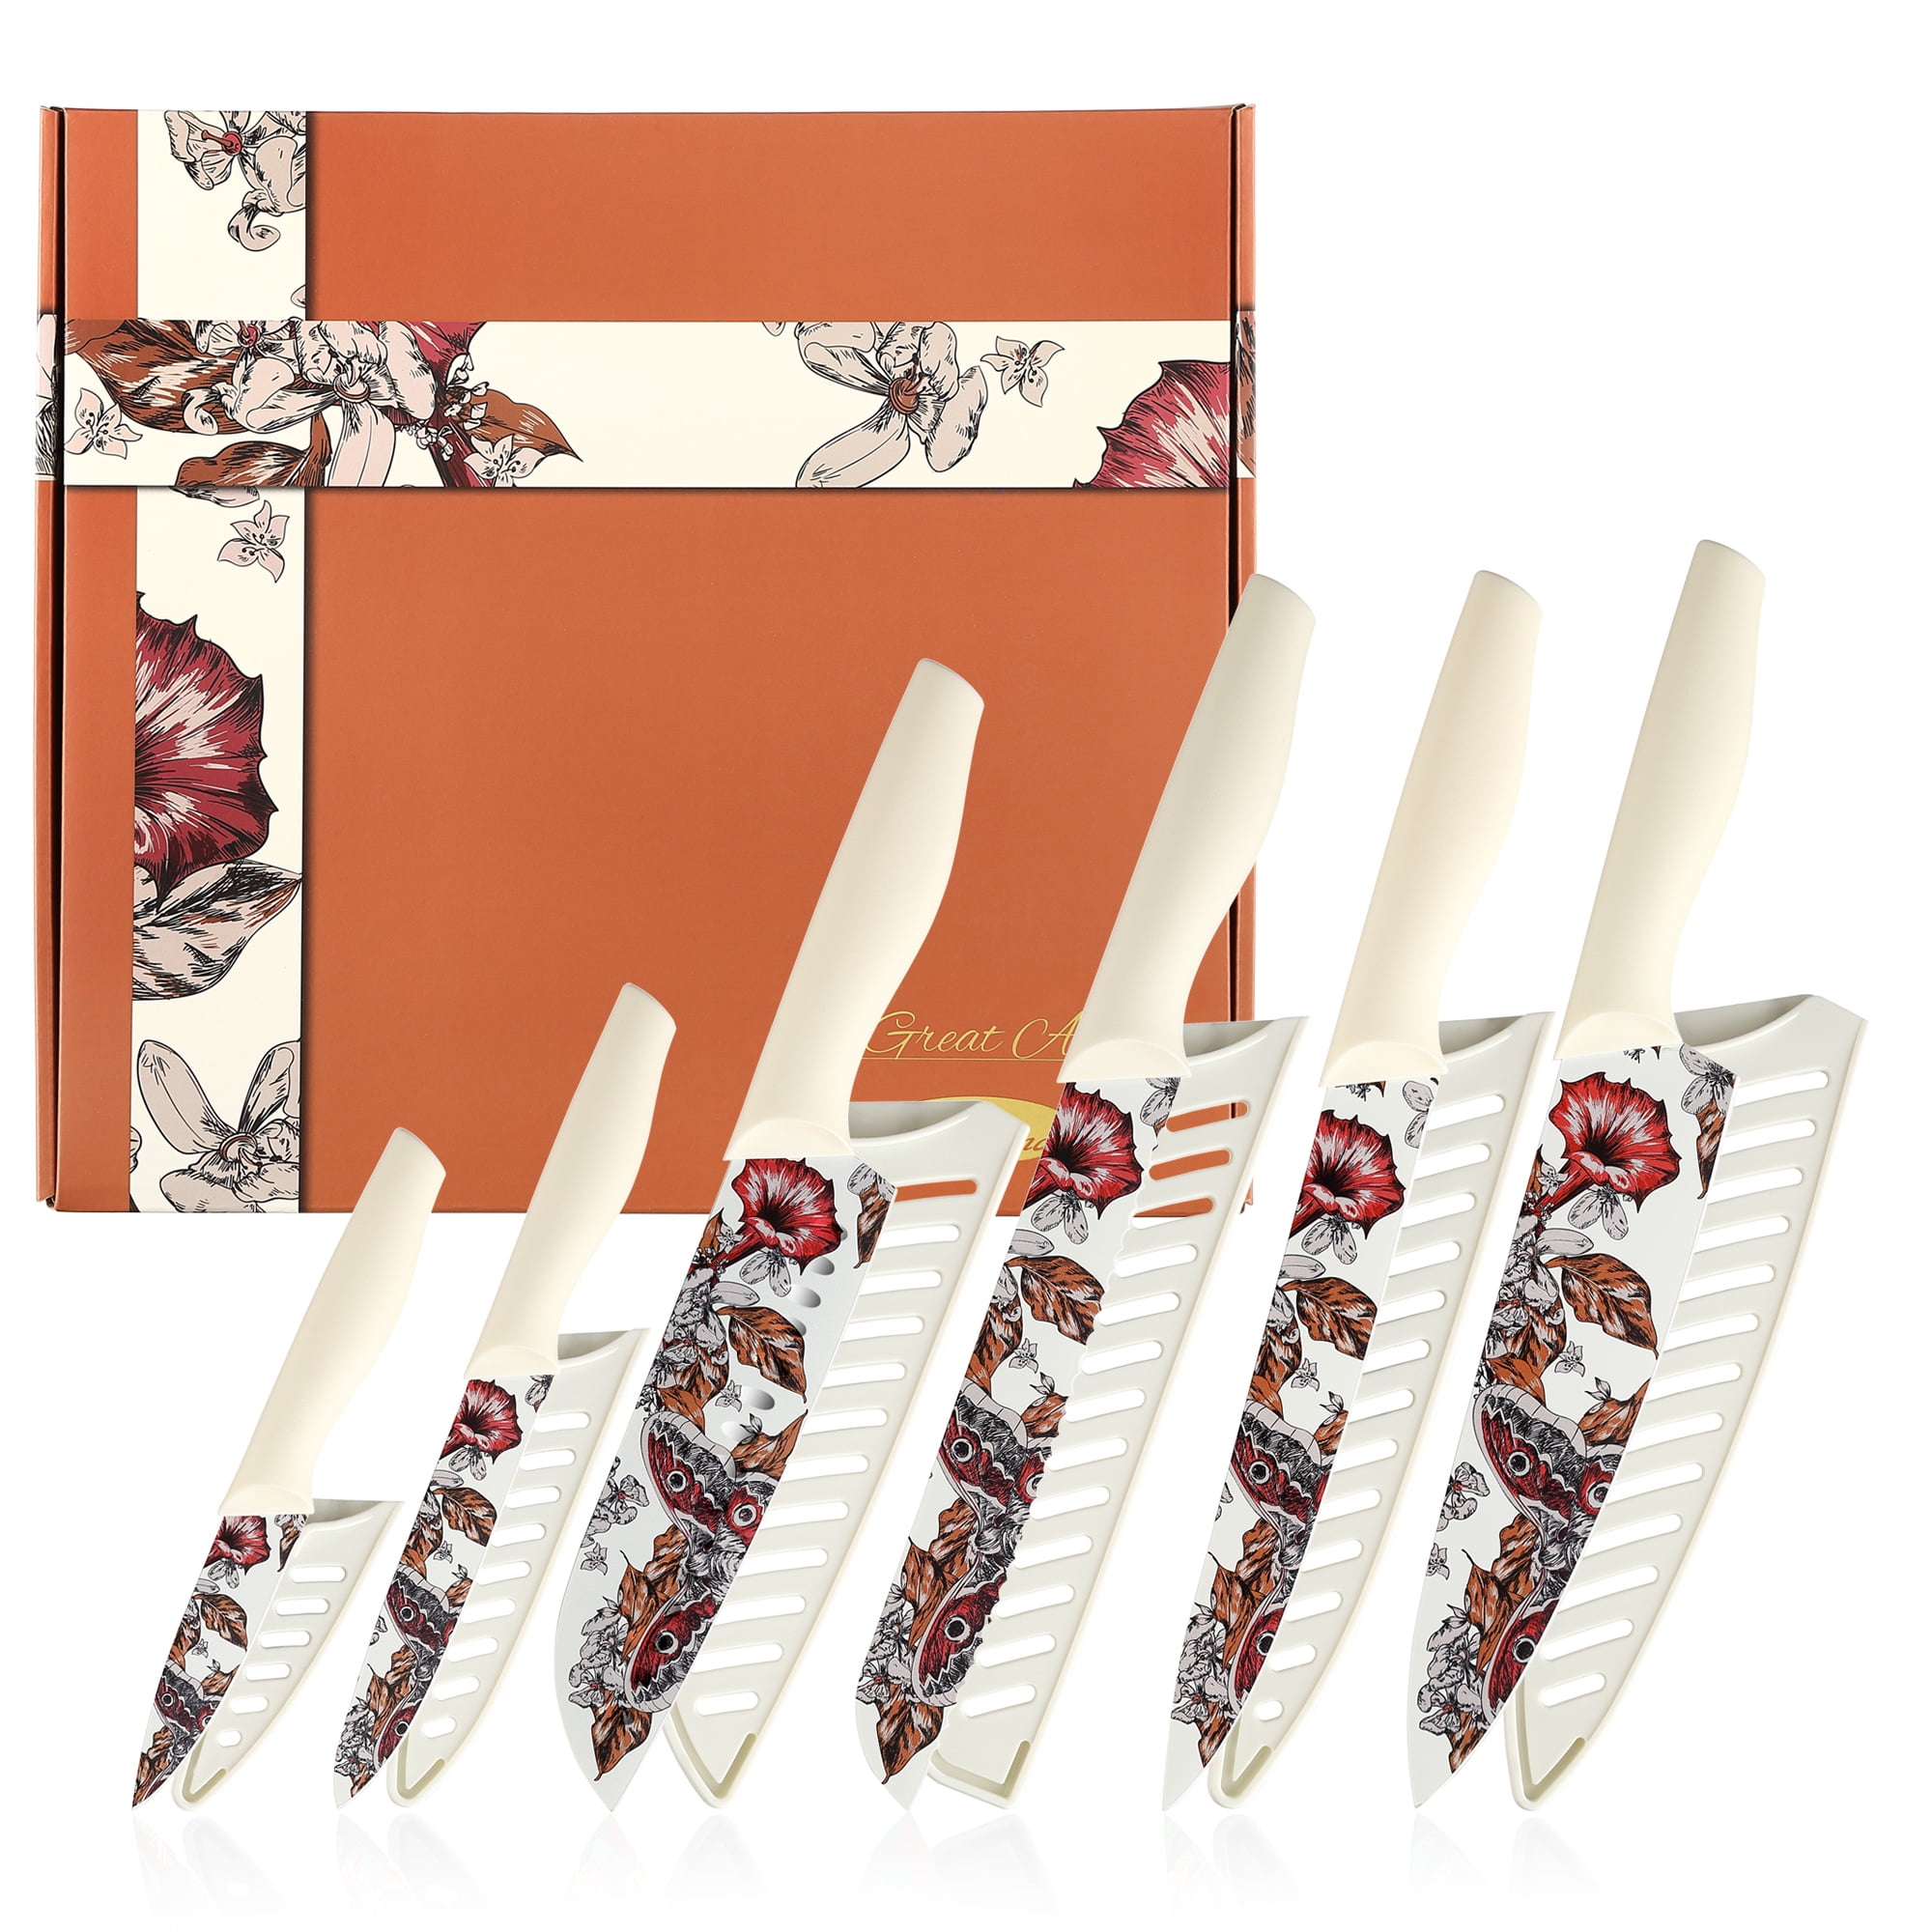 Miracle Blade III Perfection Series Knife Set 11 Piece Box